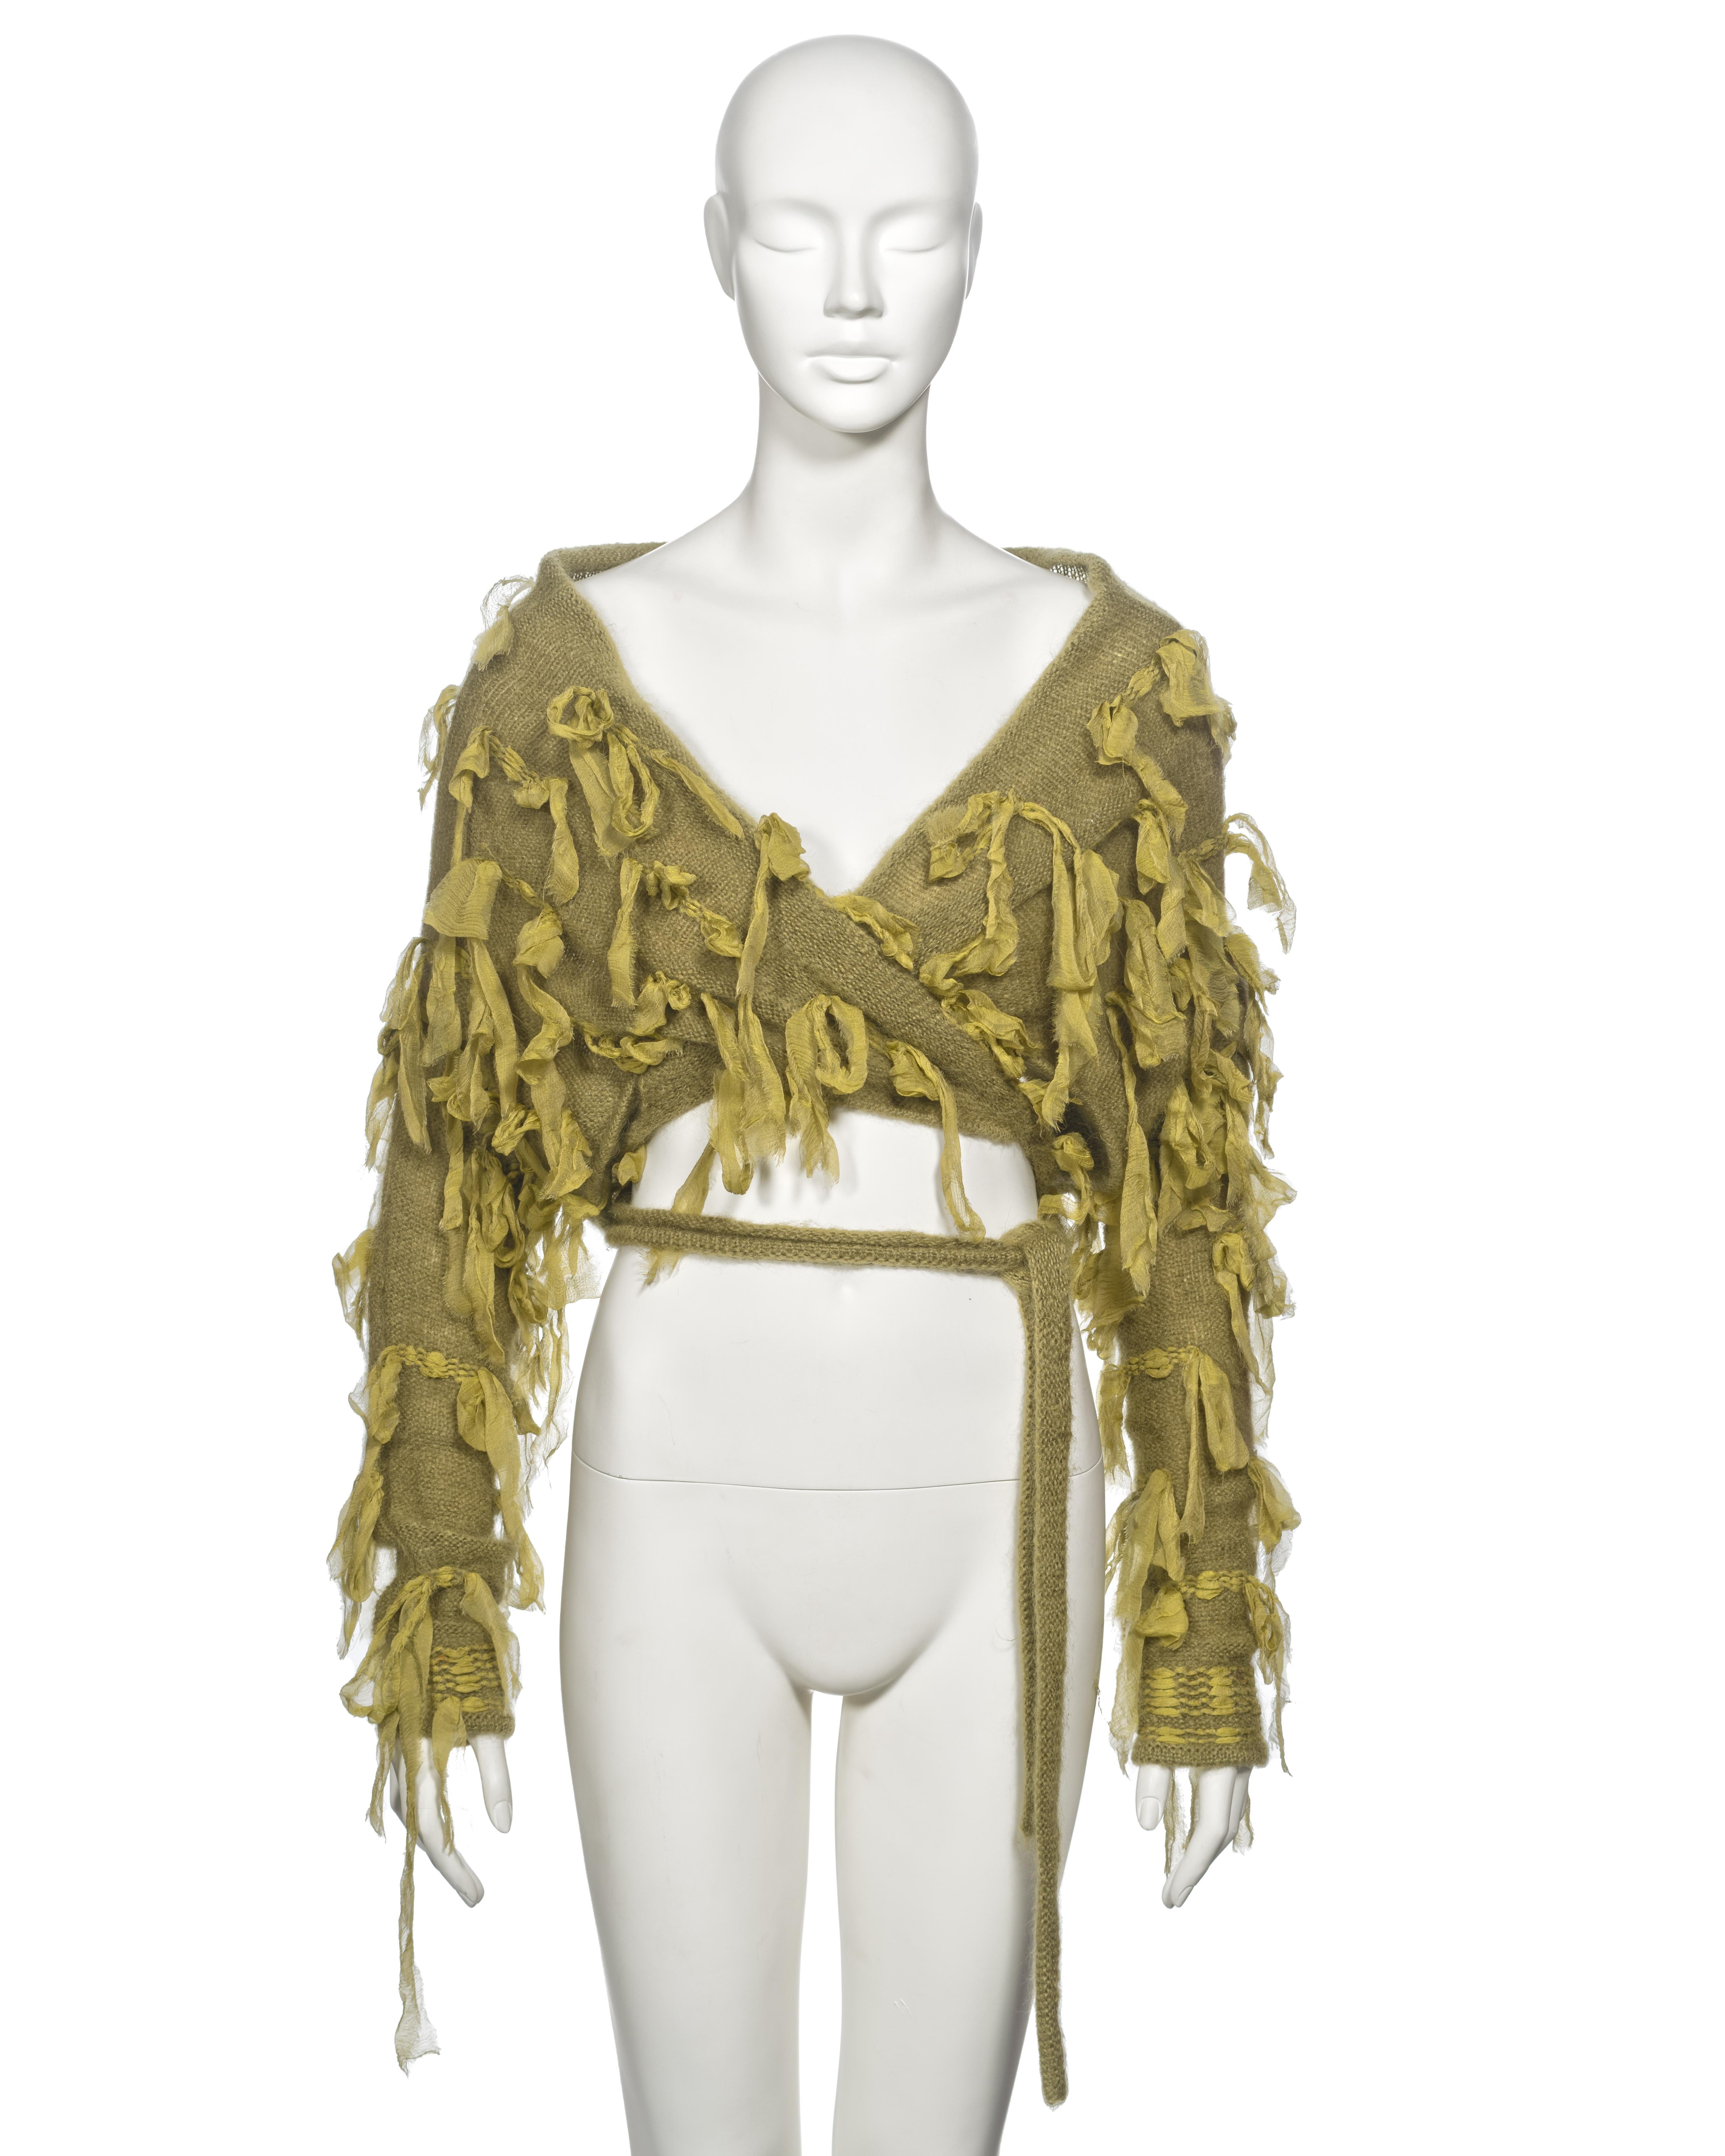 ▪ Archival Christian Dior Cardigan
▪ Creative Director: John Galliano
▪ Fall-Winter 2000
▪ Sold by One of a Kind Archive
▪ Green knitted mohair and wool 
▪ Silk Chiffon knotted ribbon appliques 
▪ Wrap fastening with two long ties 
▪ Can be worn